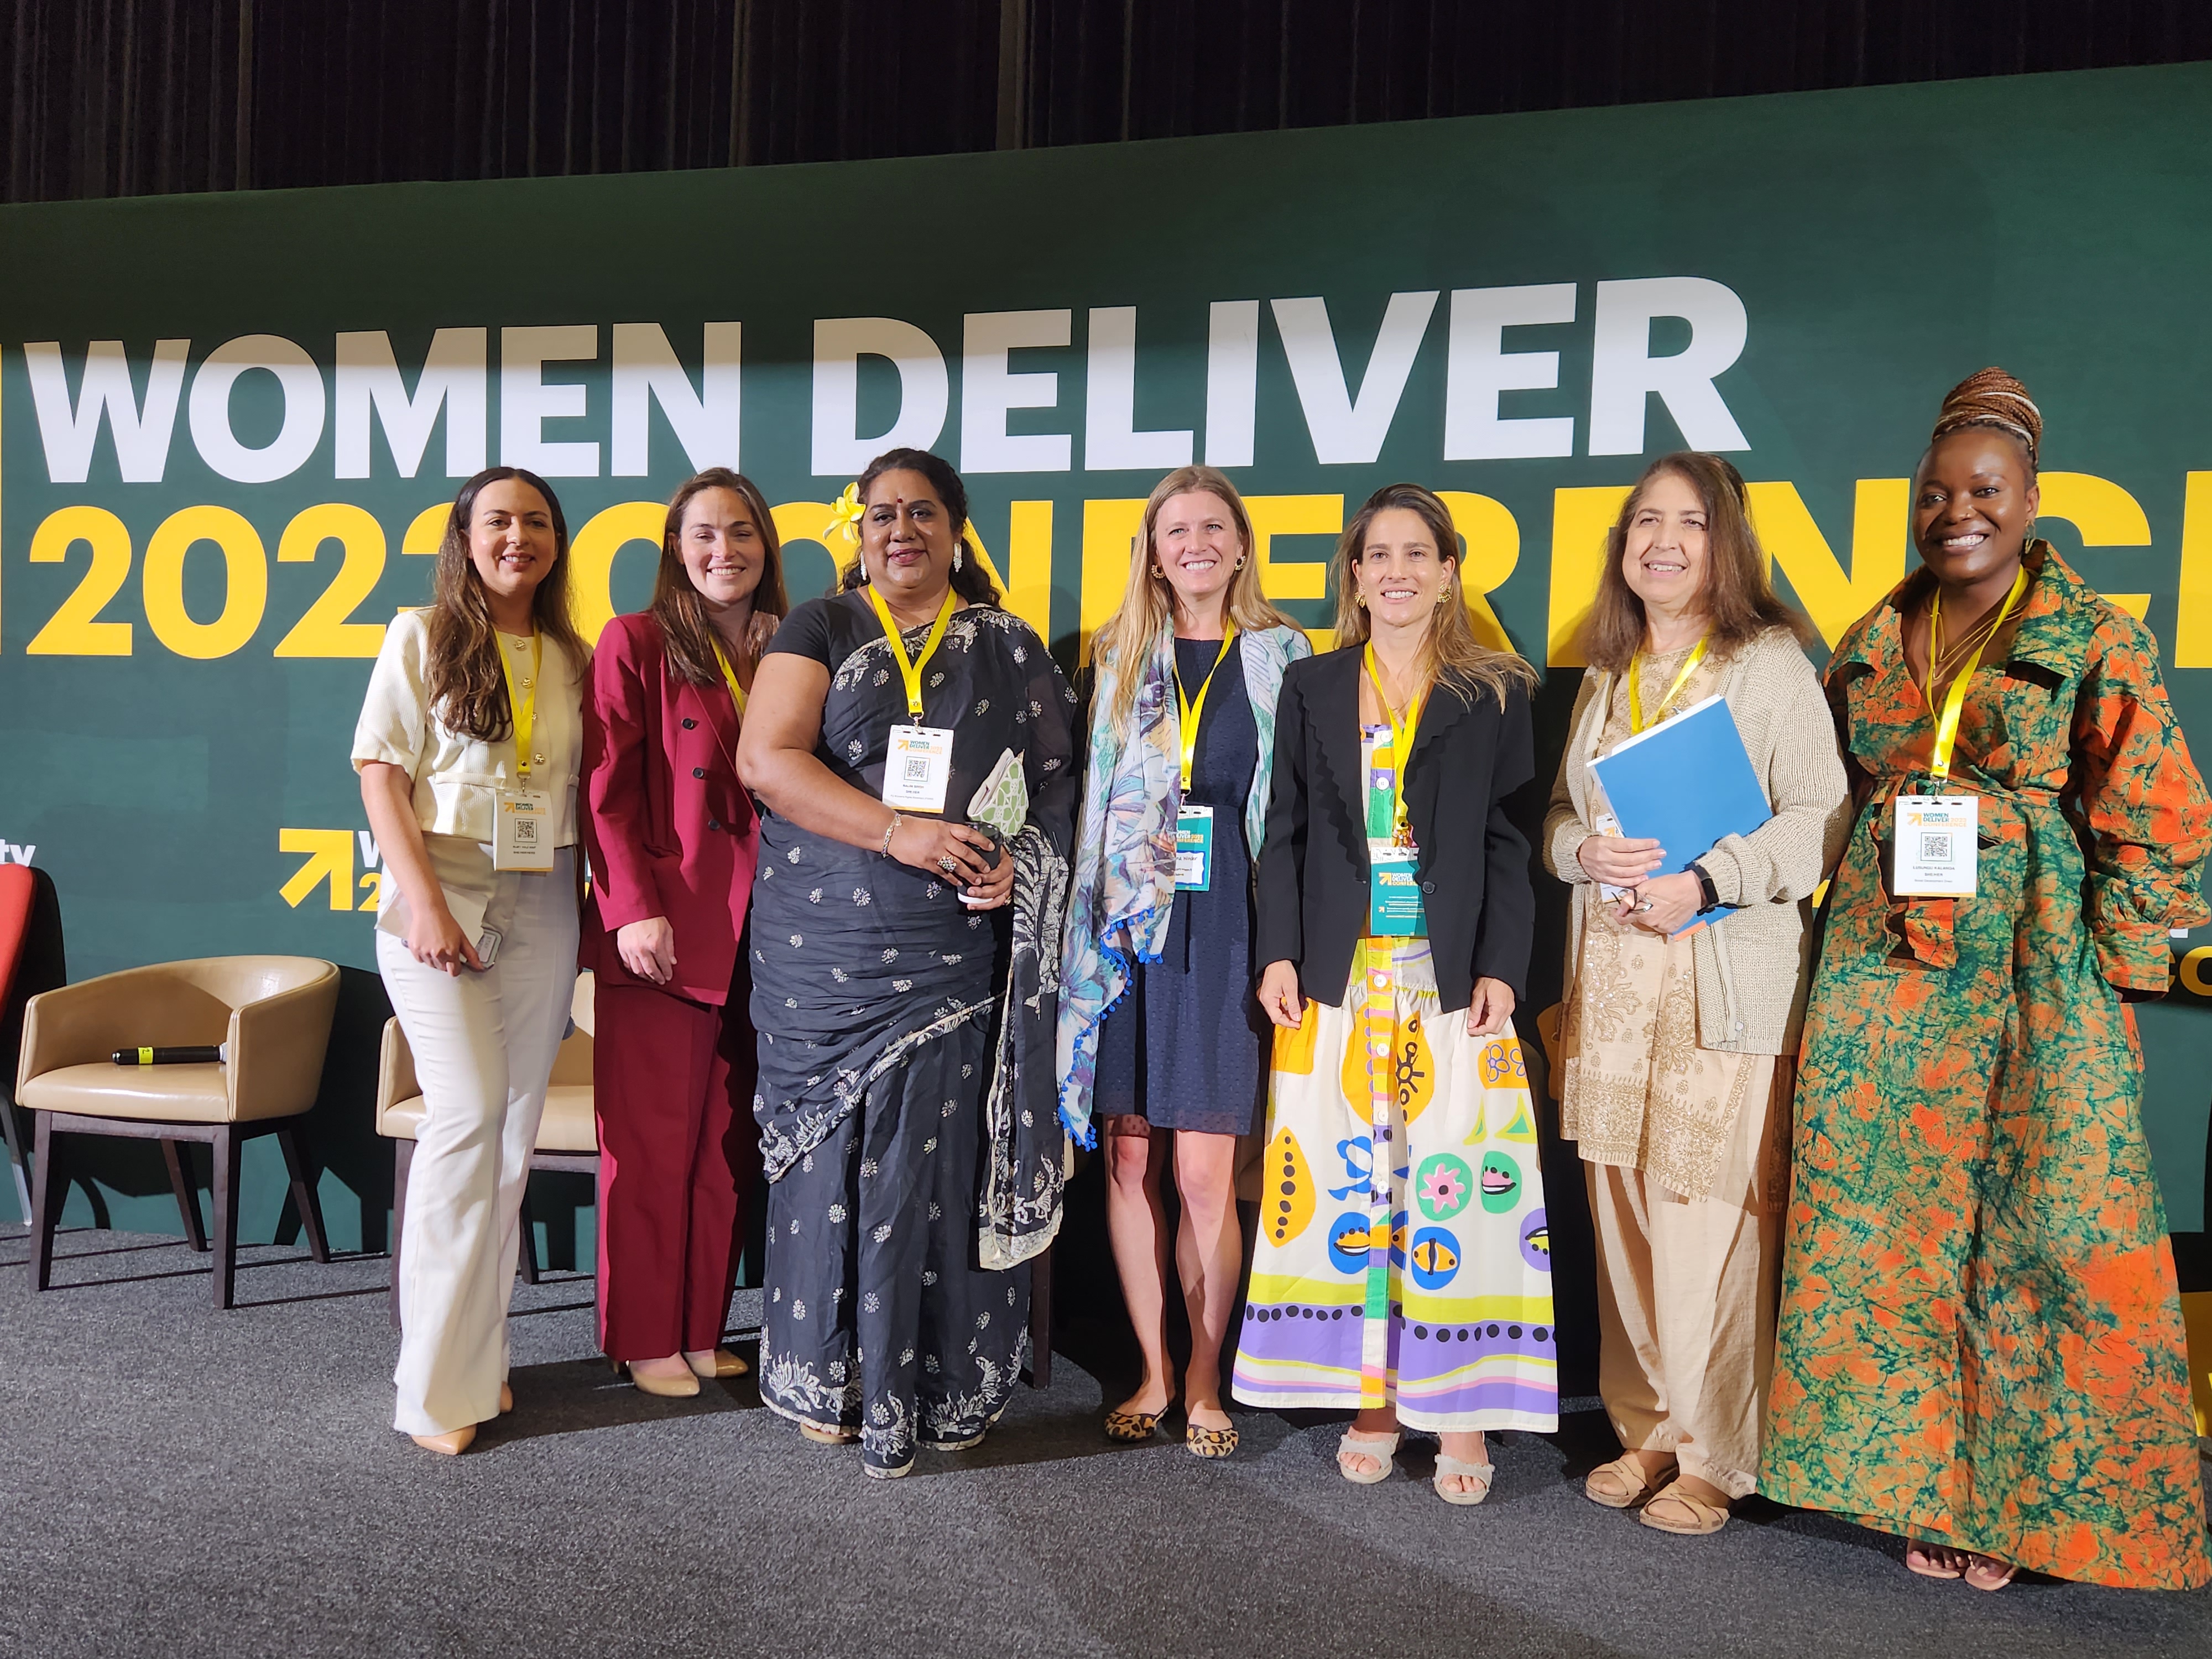 Panelists at the Women Deliver 2023 conference for the "Preventing & responding to violence against women: From evidence to action" pre-conference event.